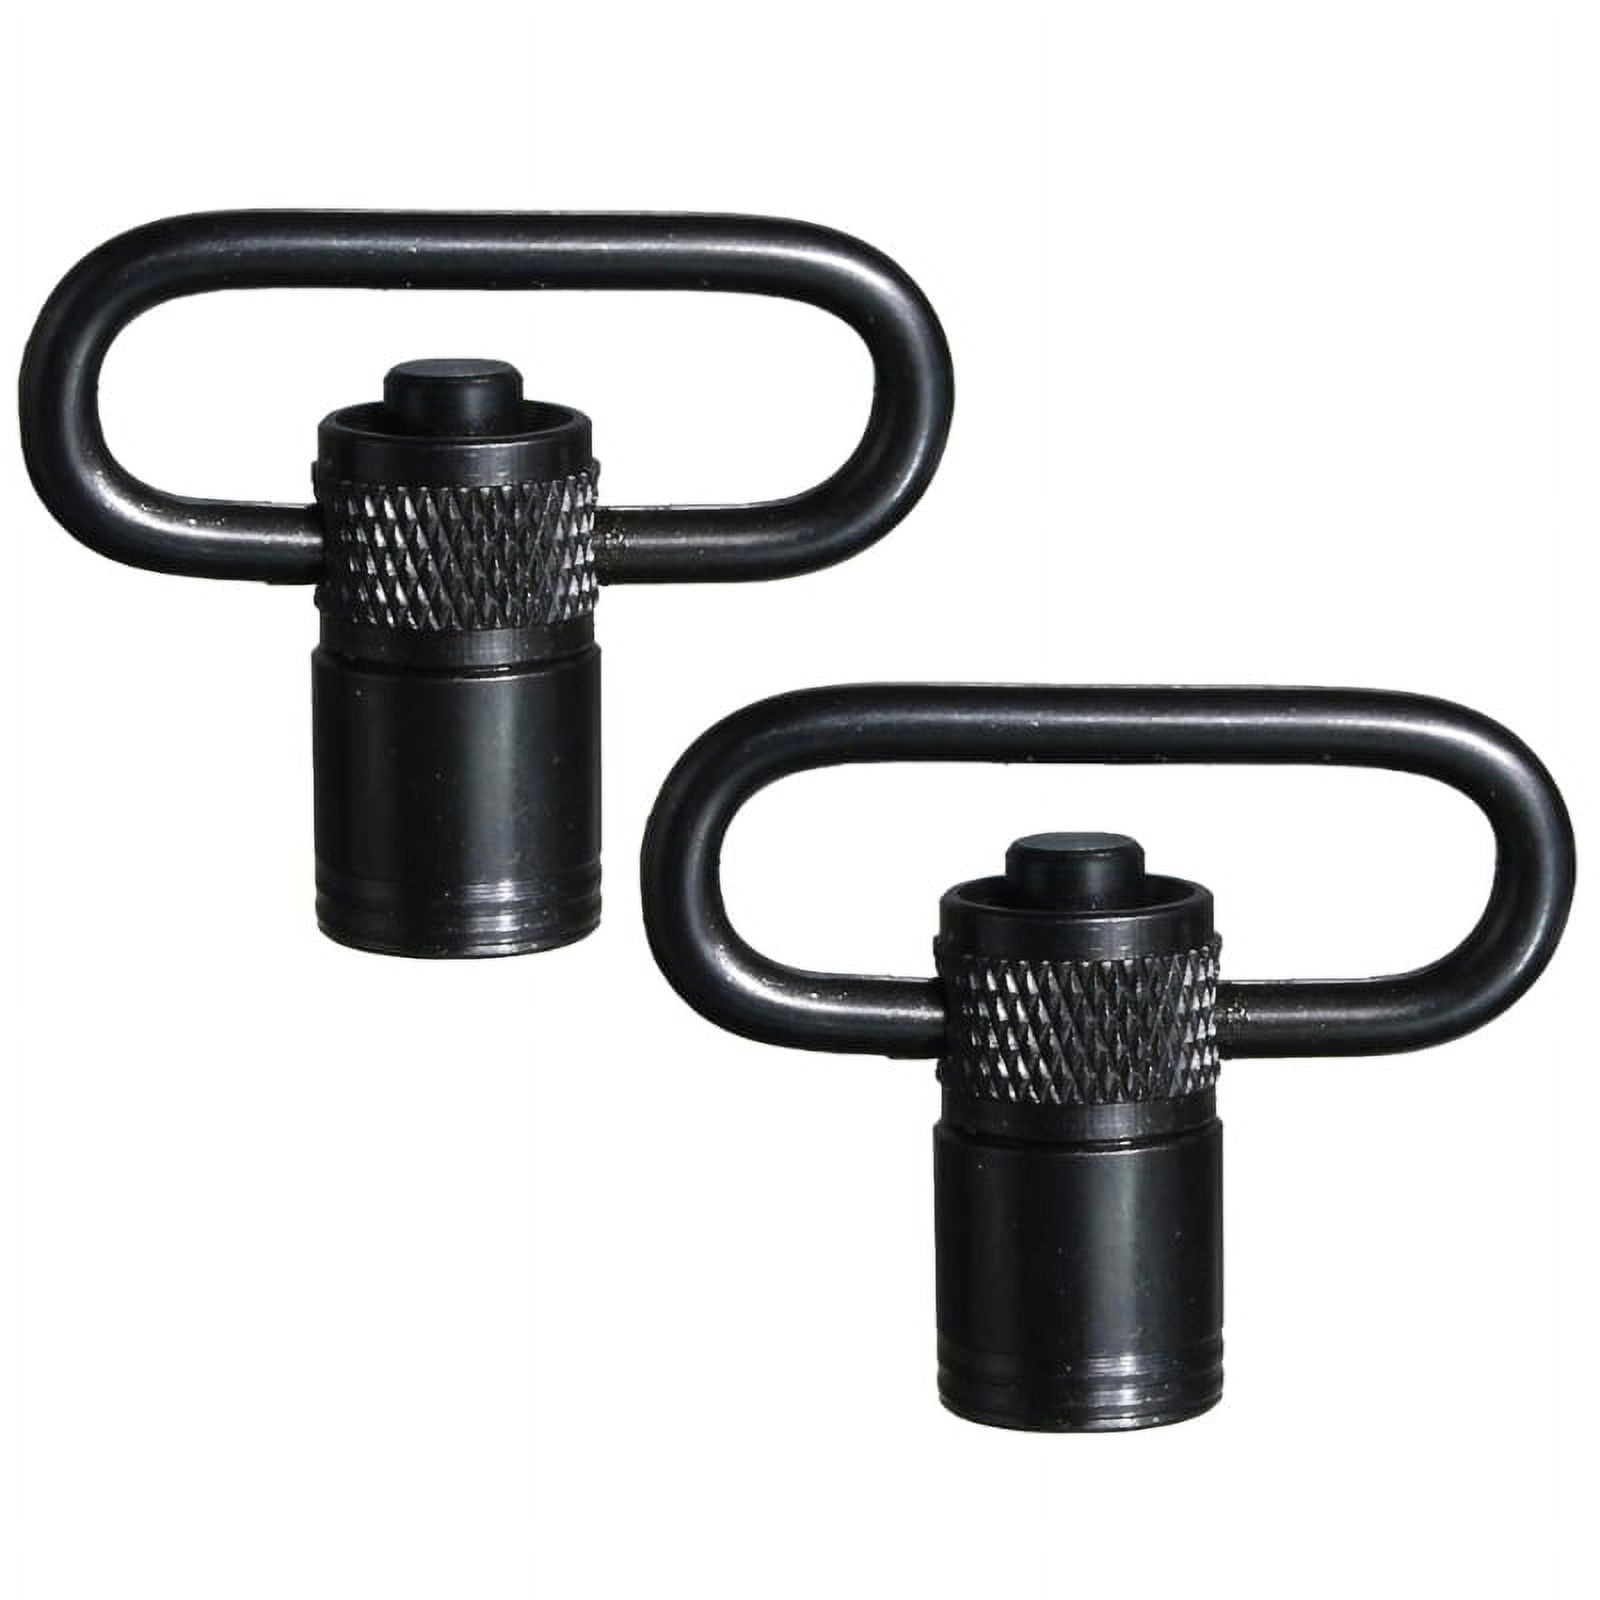 WINDLAND 2 Pieces Quick Release Sling Swivel Push Button QD Sling ...